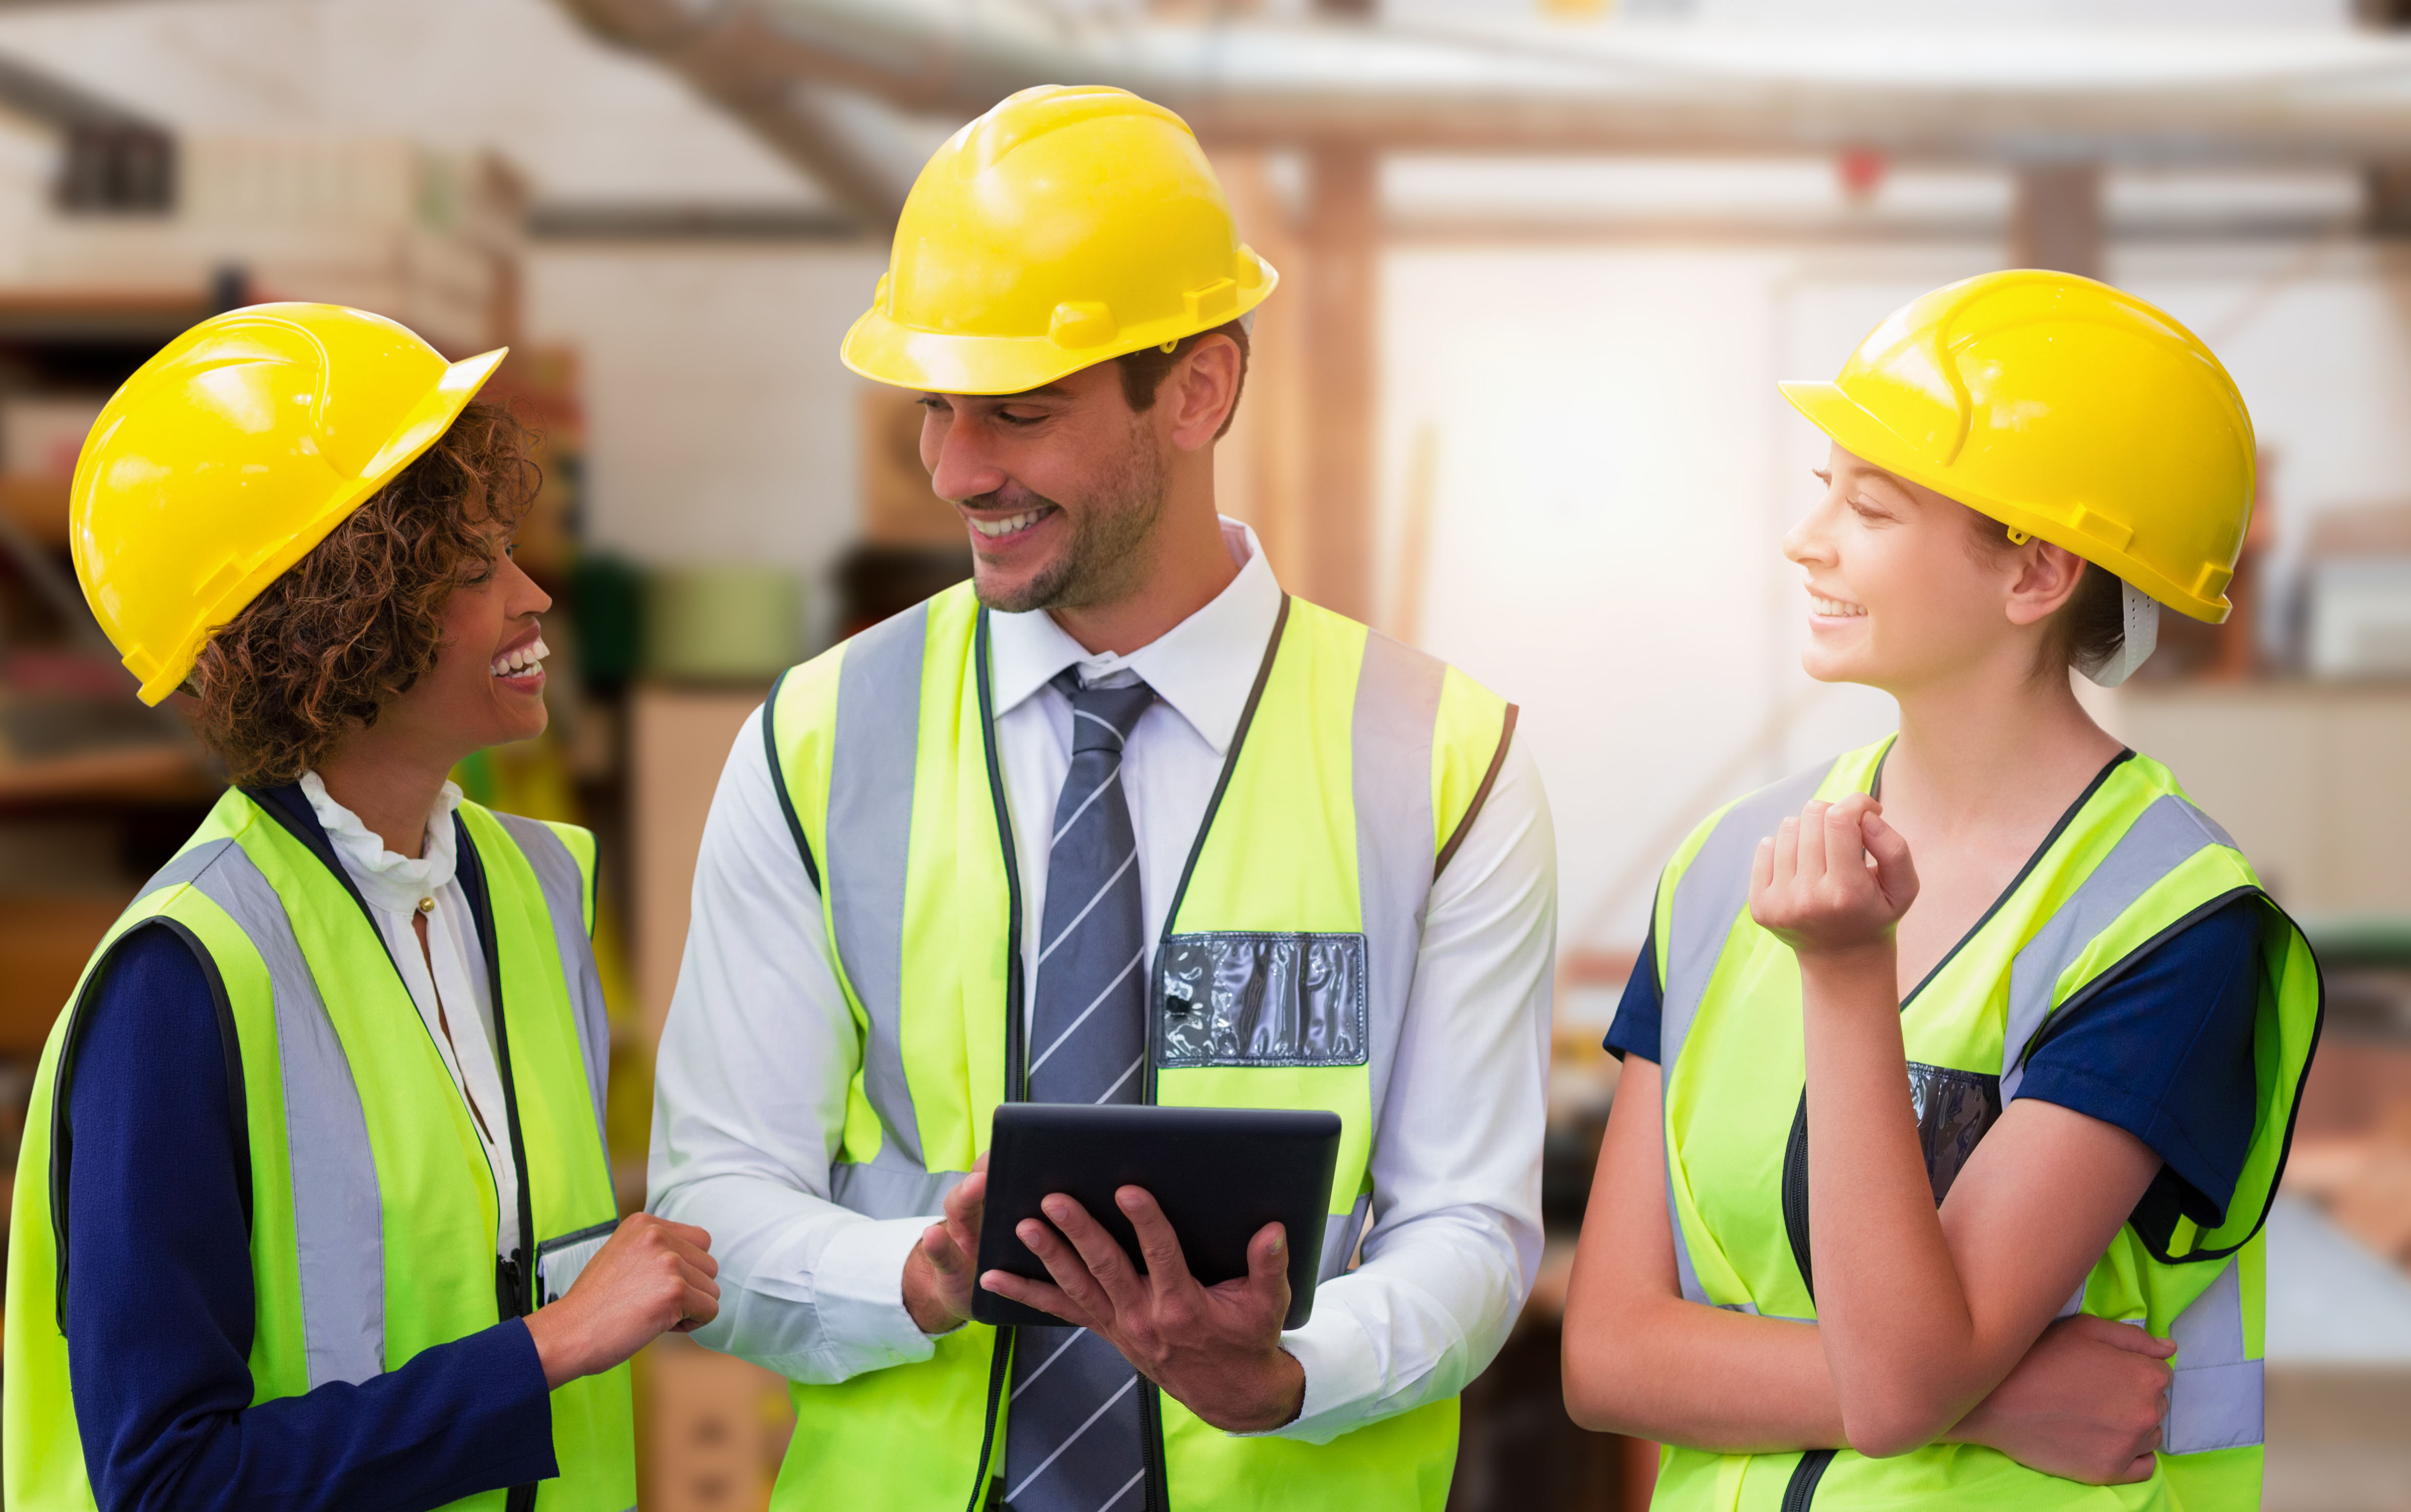 teps to OSHAⓇ Employee Safety Training Records Requirements